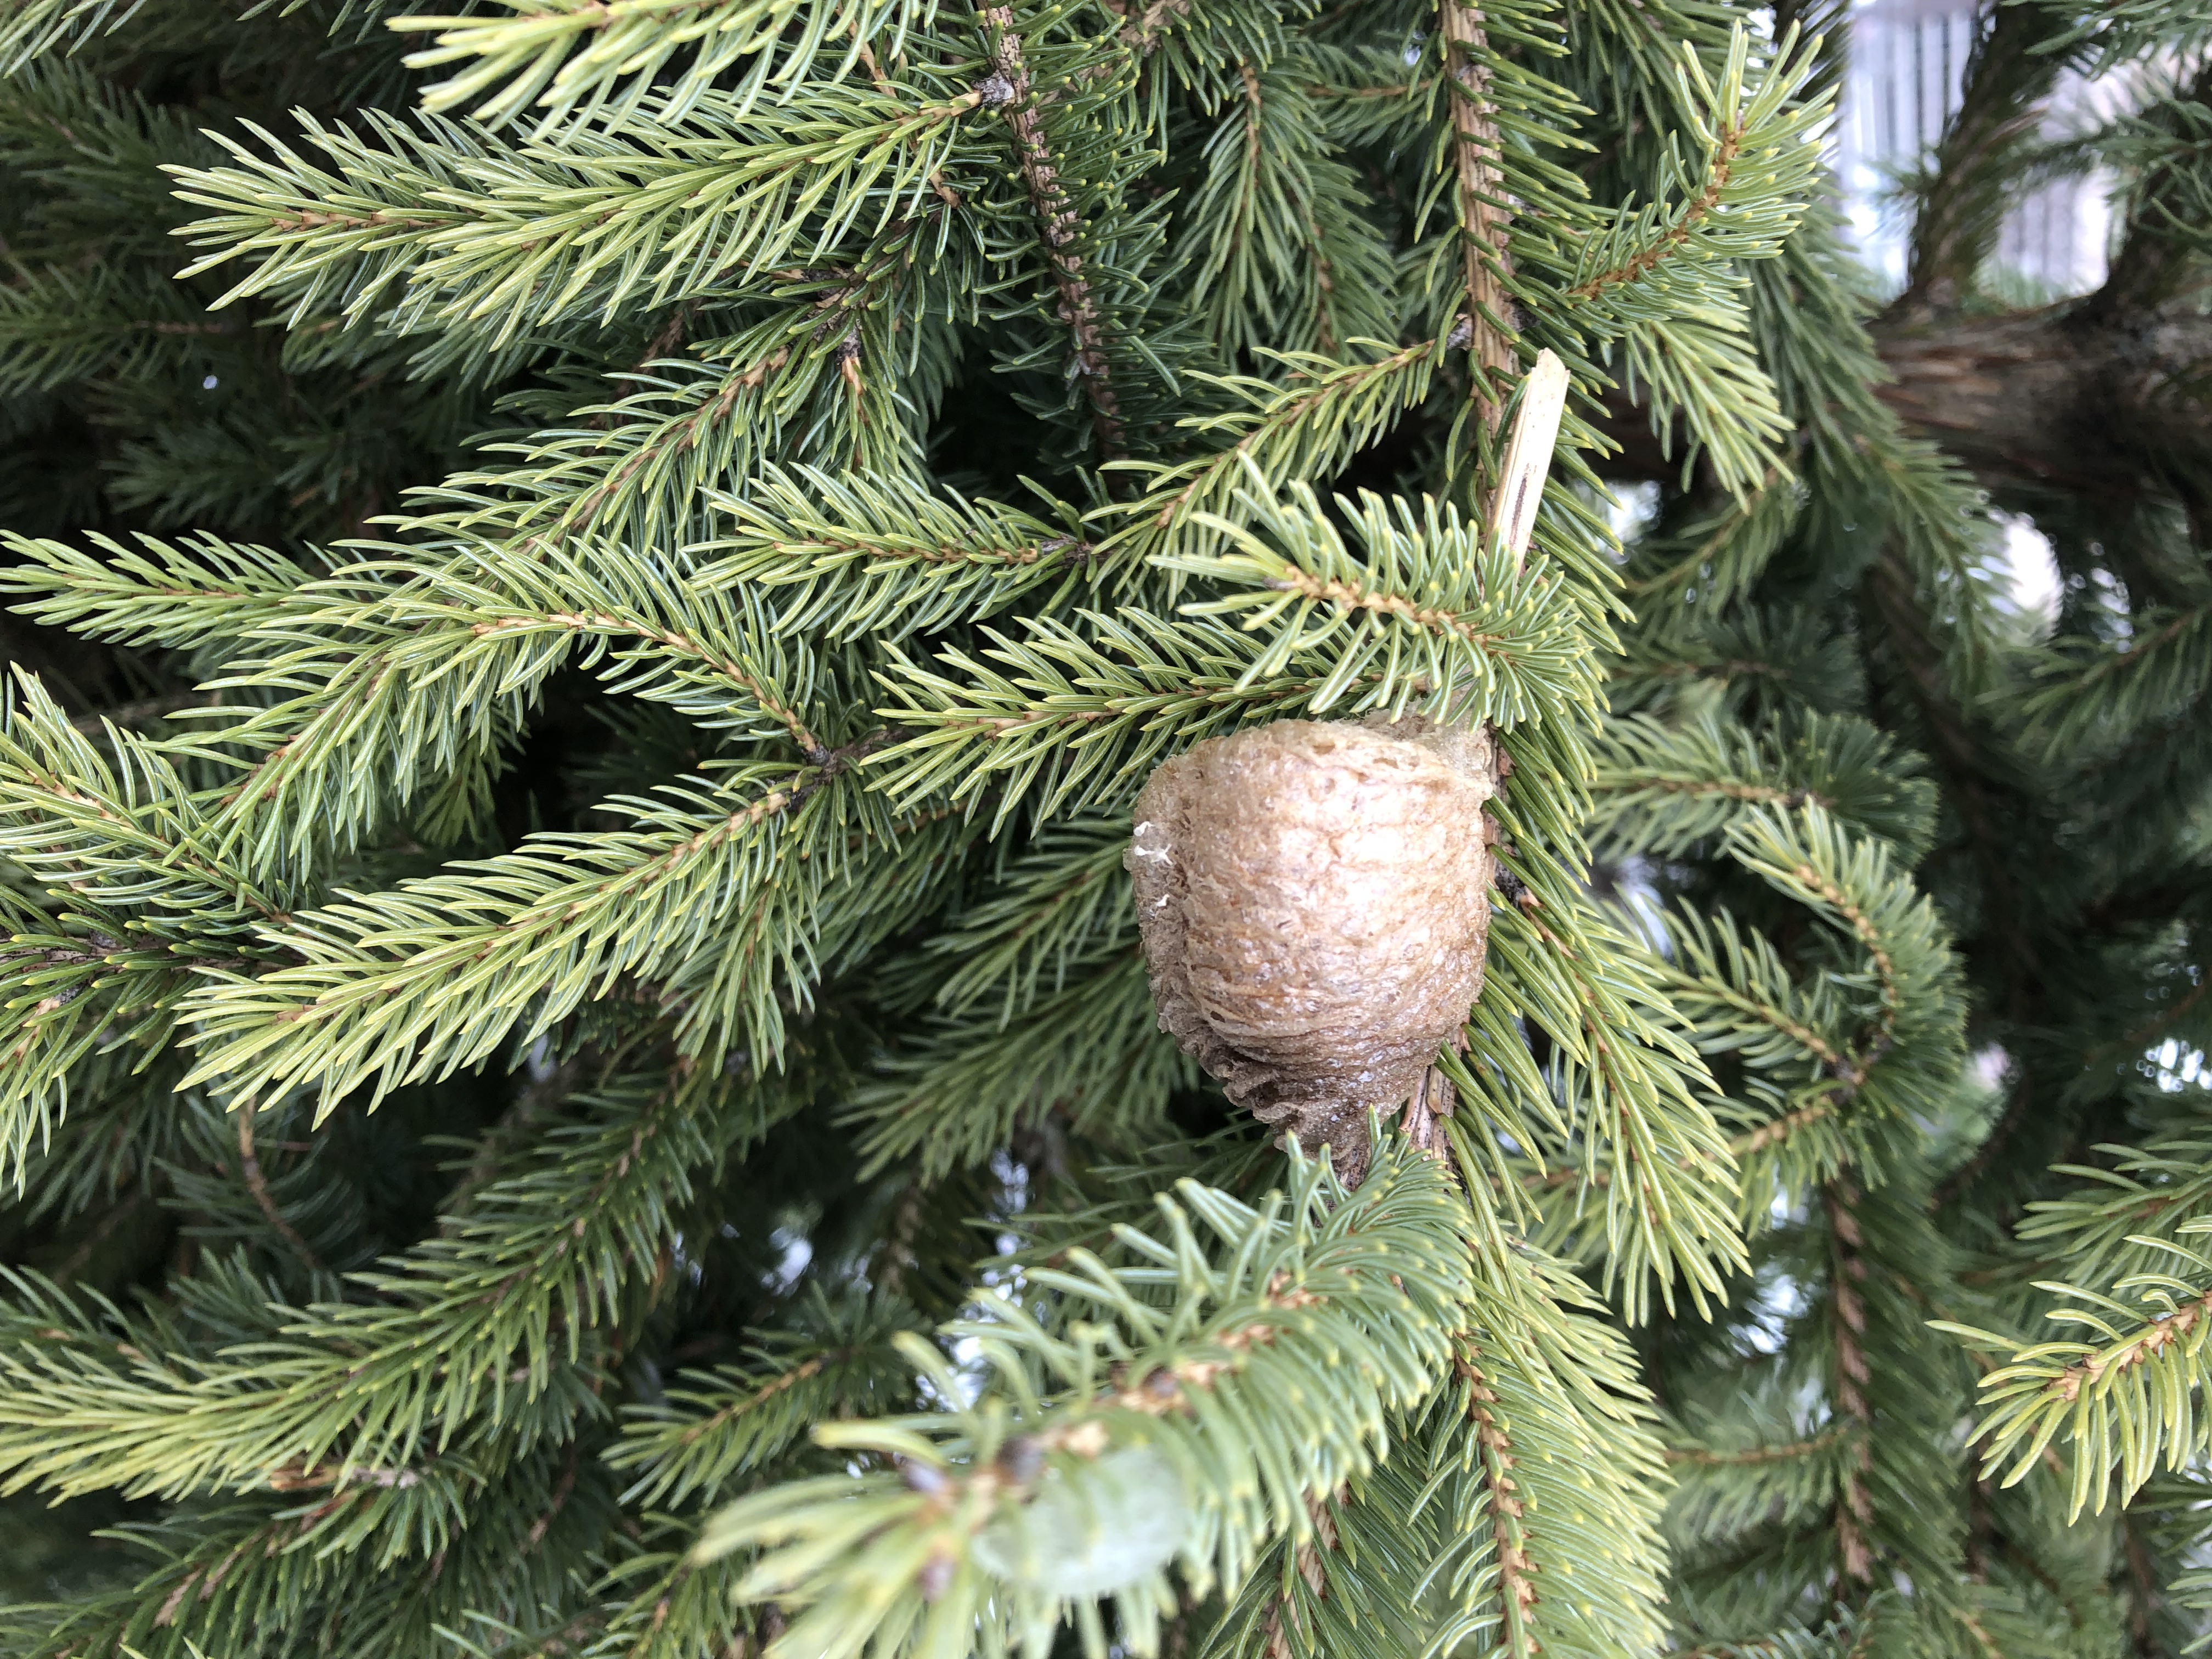 Ohio bug expert warns insect egg cases could be in your Christmas tree